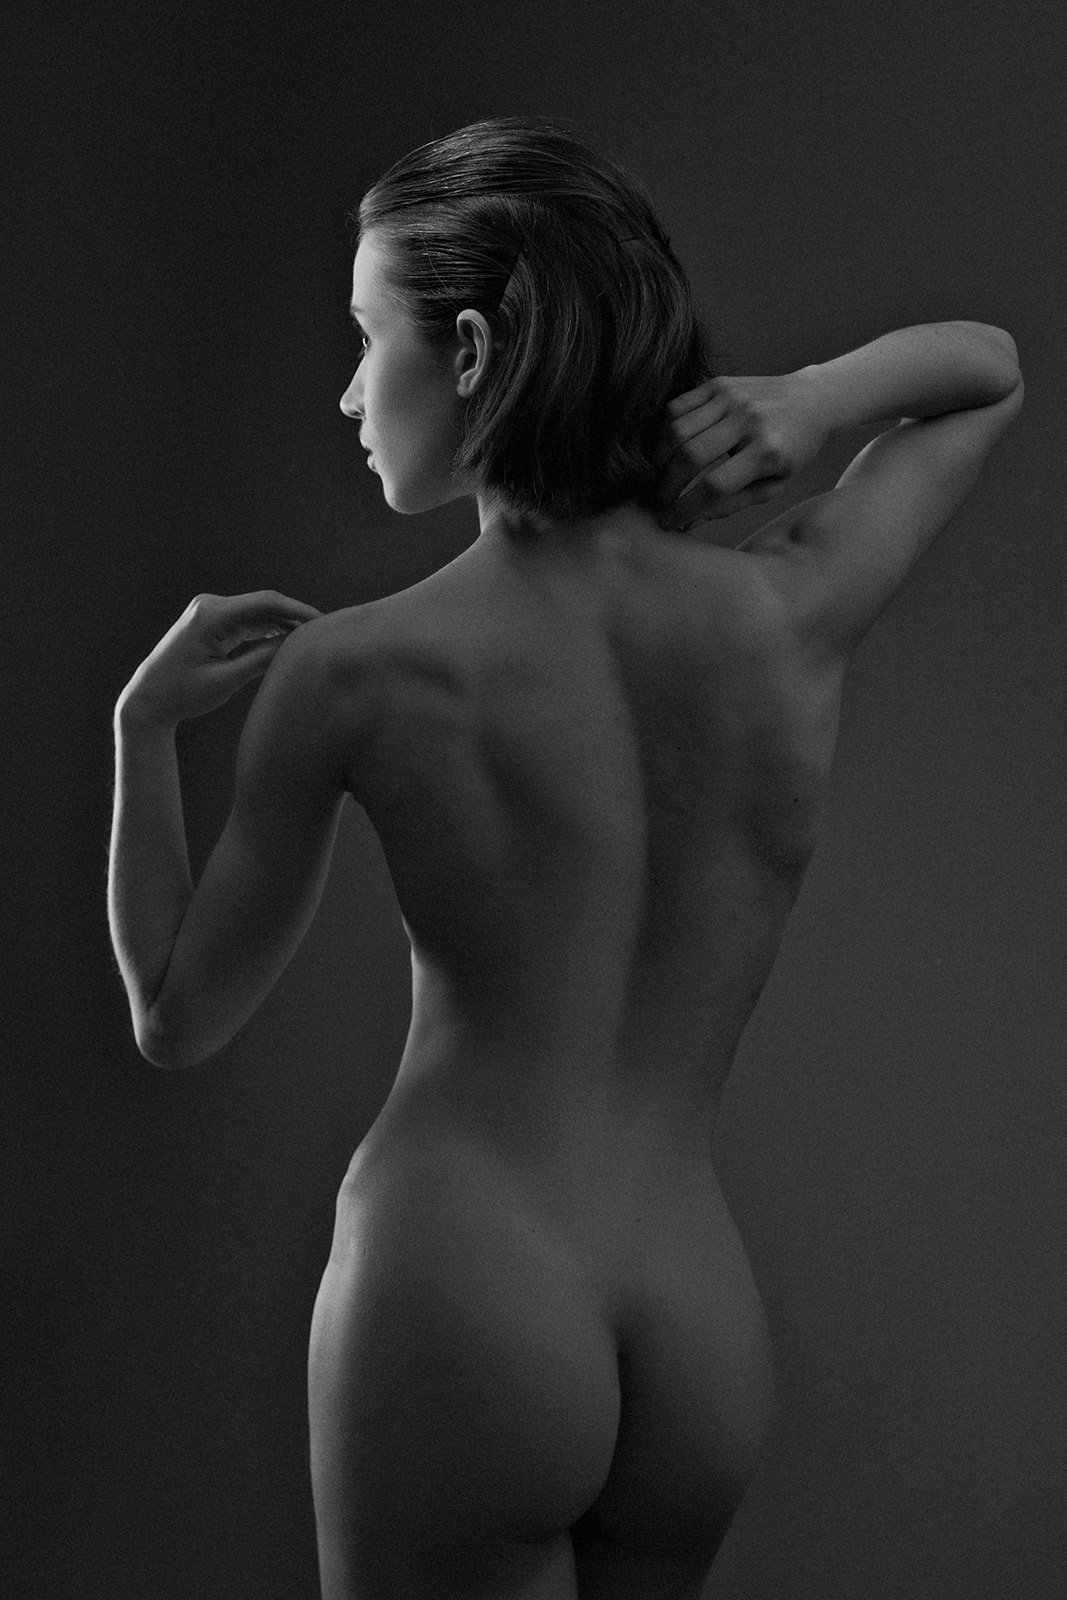 nude, female, art, portrait, photo, expression, nudes, naked, drama, dramatic, naked, woman, young, adult, face, body, beauty, Дмитрий Толоконов